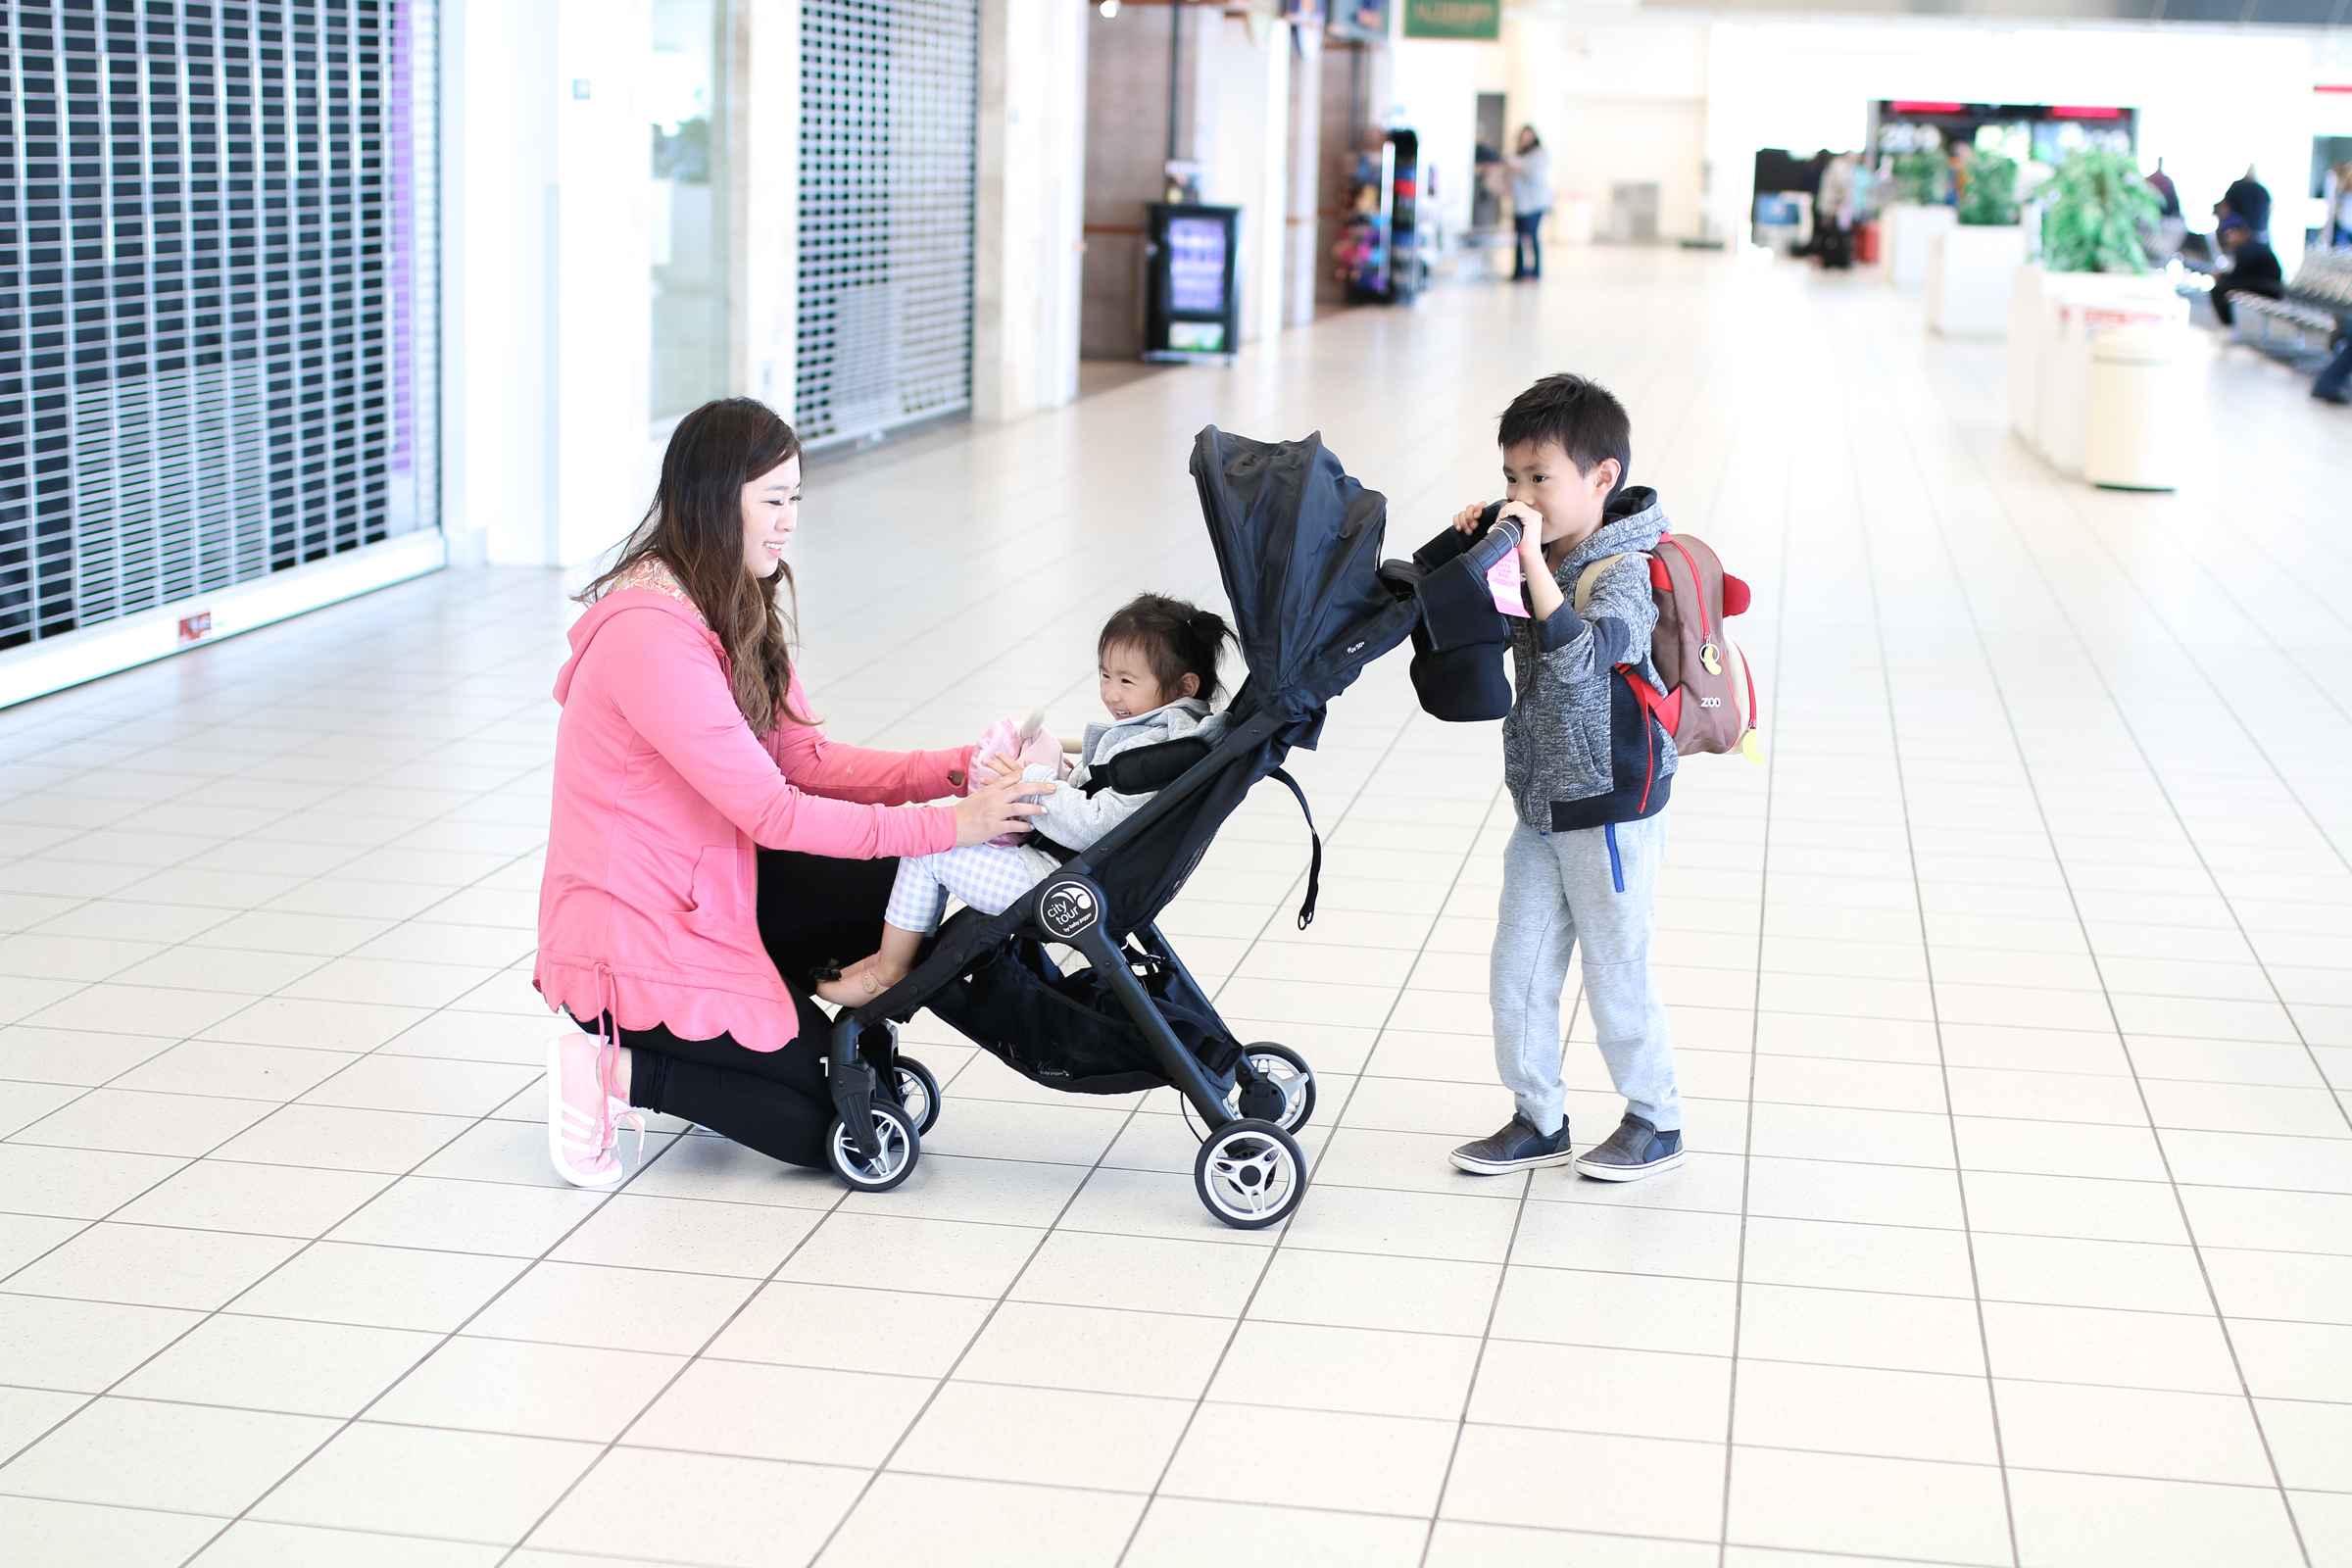 5 Travel Hacks For Traveling With Little Ones with Baby Jogger by lifestyle blogger Sandy A La Mode